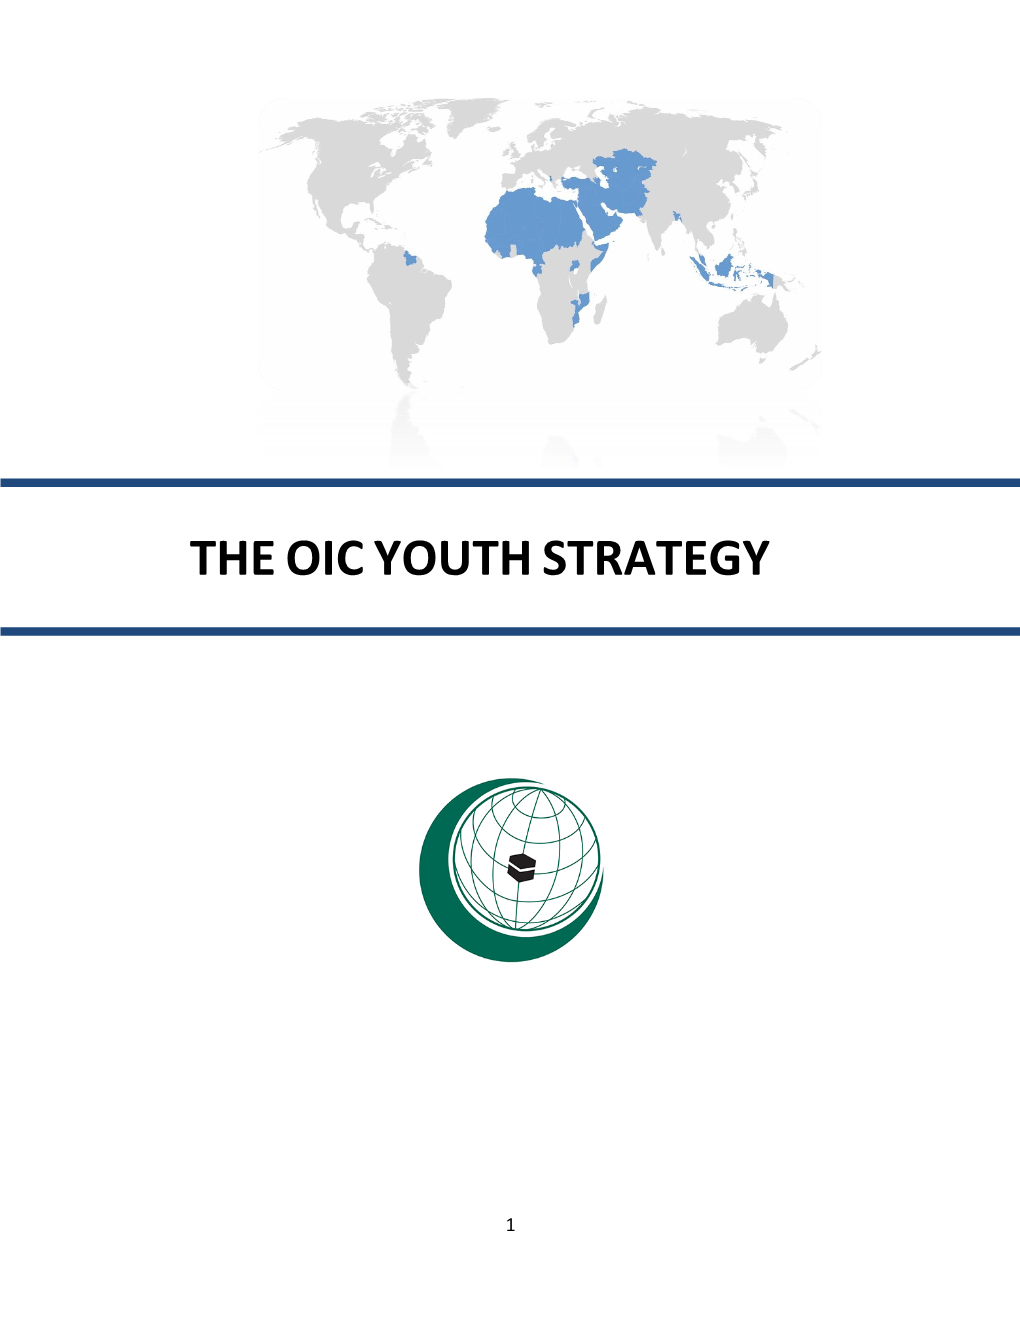 Theoicyouthstrategy